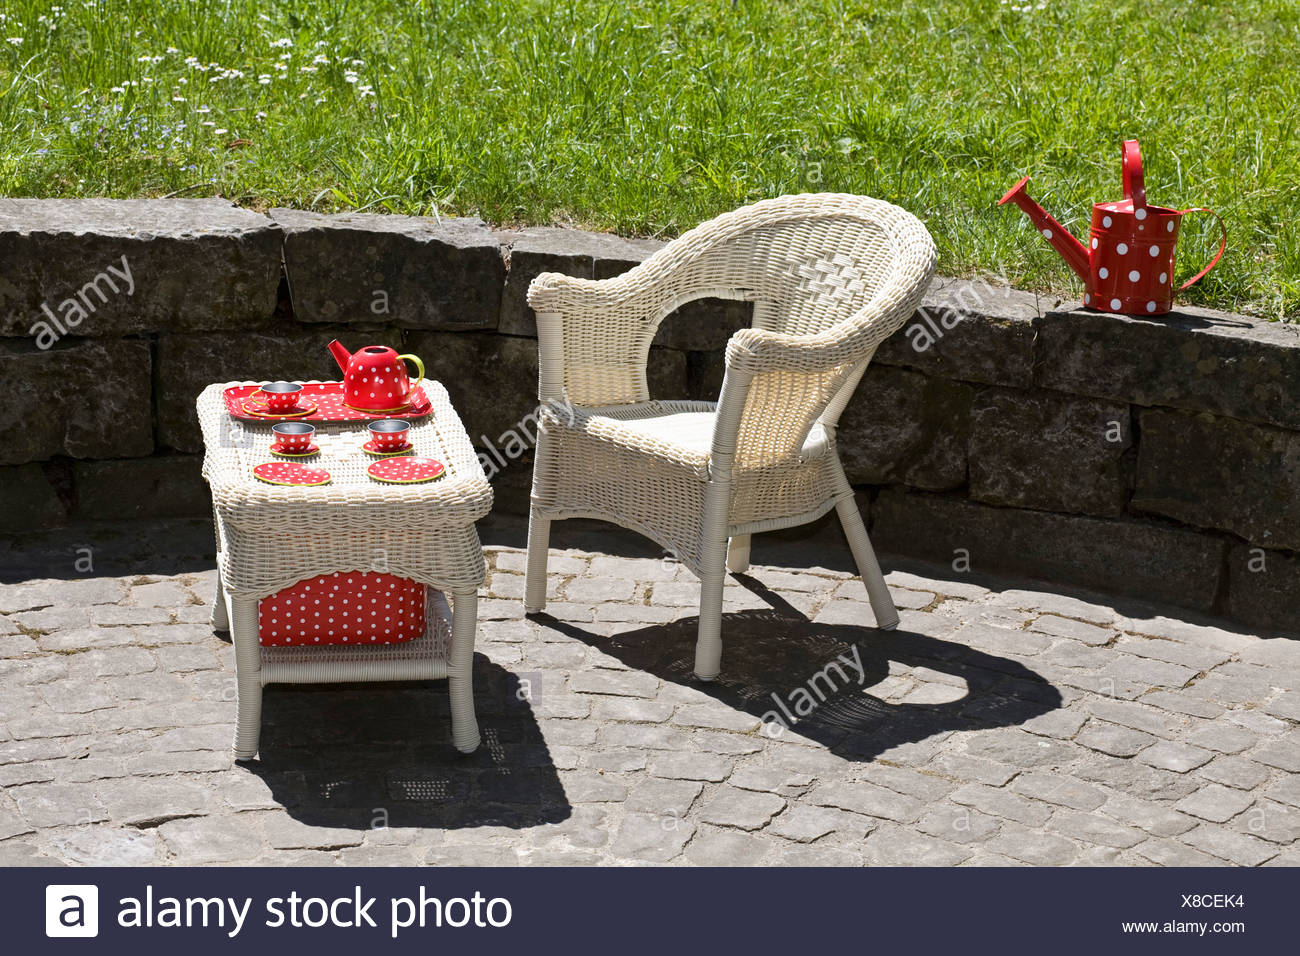 A Wicker Chair And Table With A Child S Tea Set Outdoors Stock